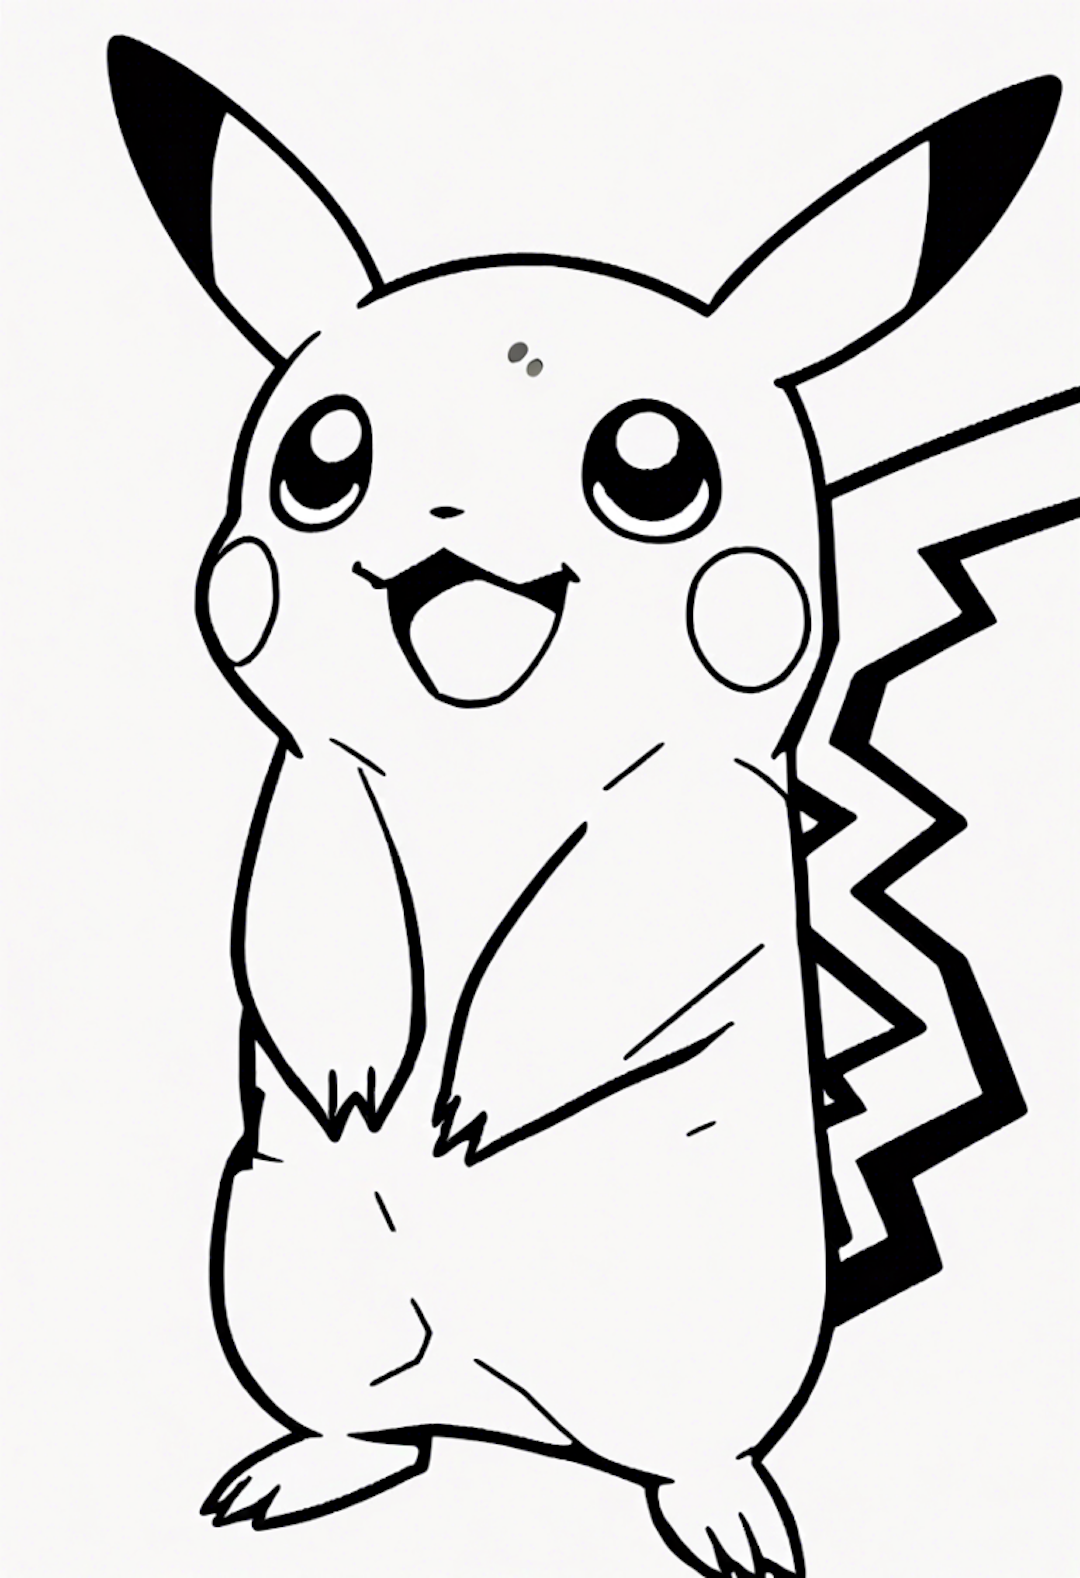 Shy Pikachu coloring pages